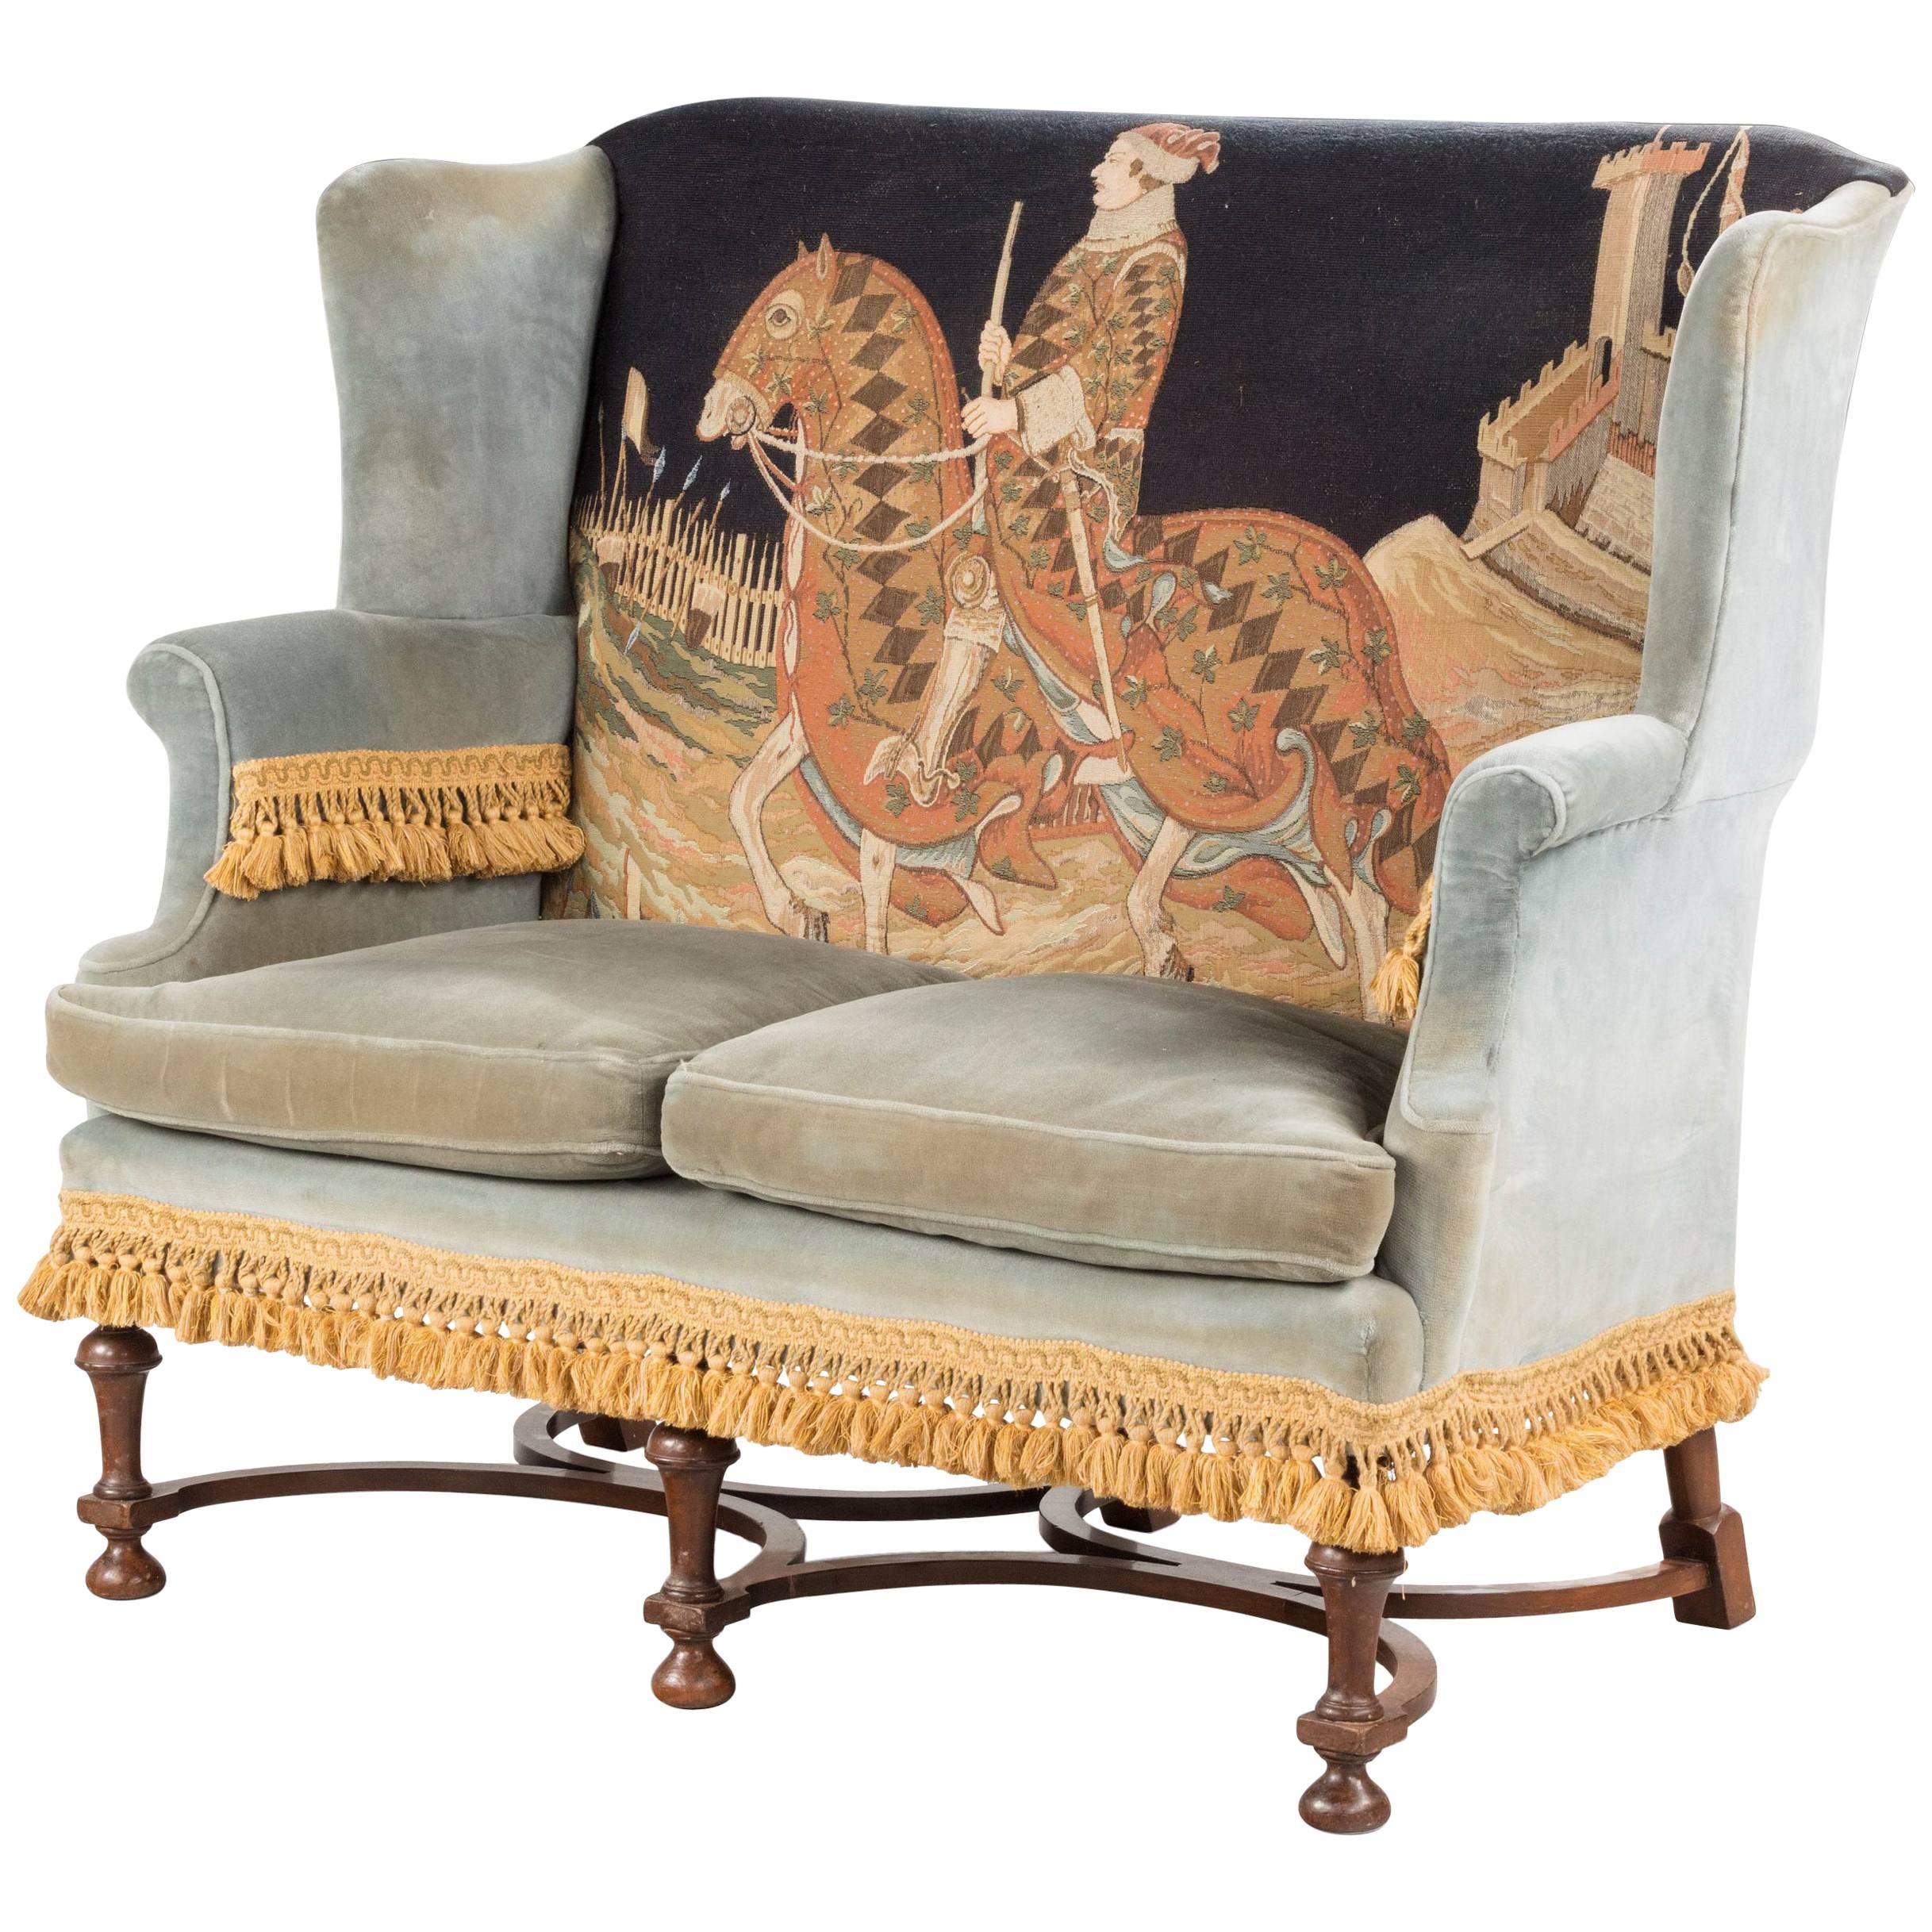 William and Mary Walnut Style Sofa with a Tapestry of a Horseman